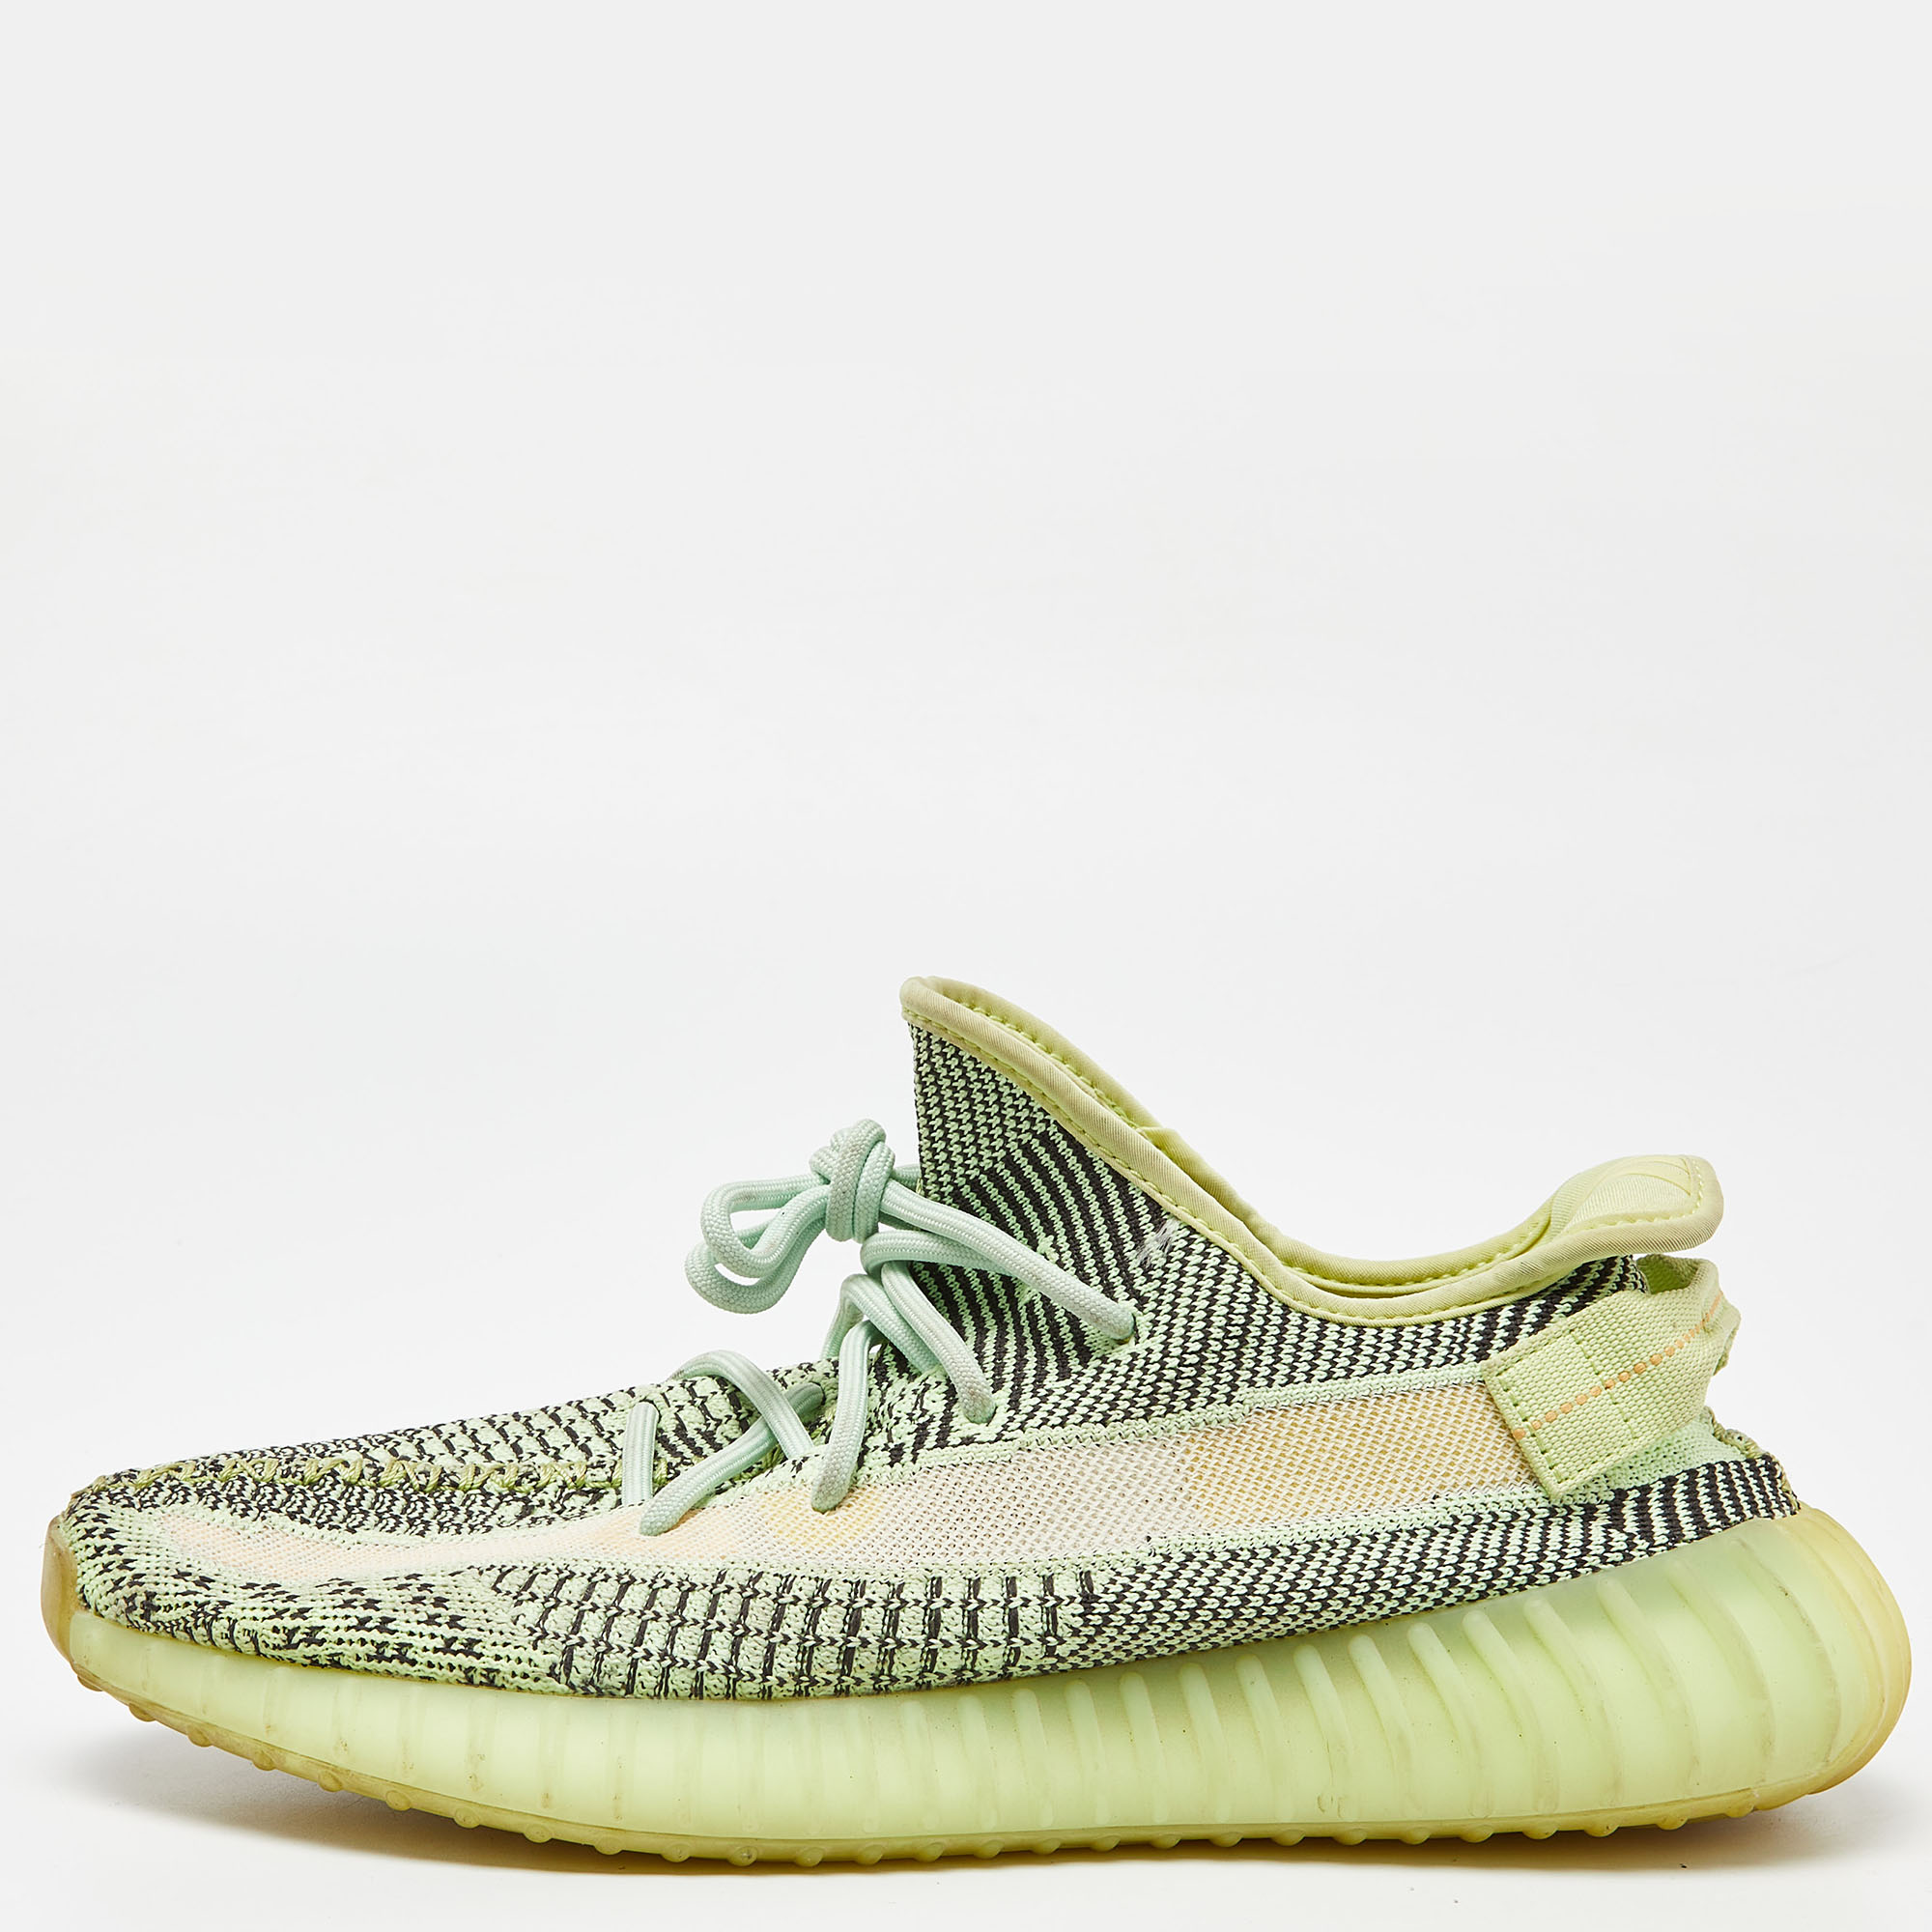 Pre-owned Yeezy X Adidas Green Knit Fabric Boost 350 V2 Yeezreel Non-reflective Trainers Size 44